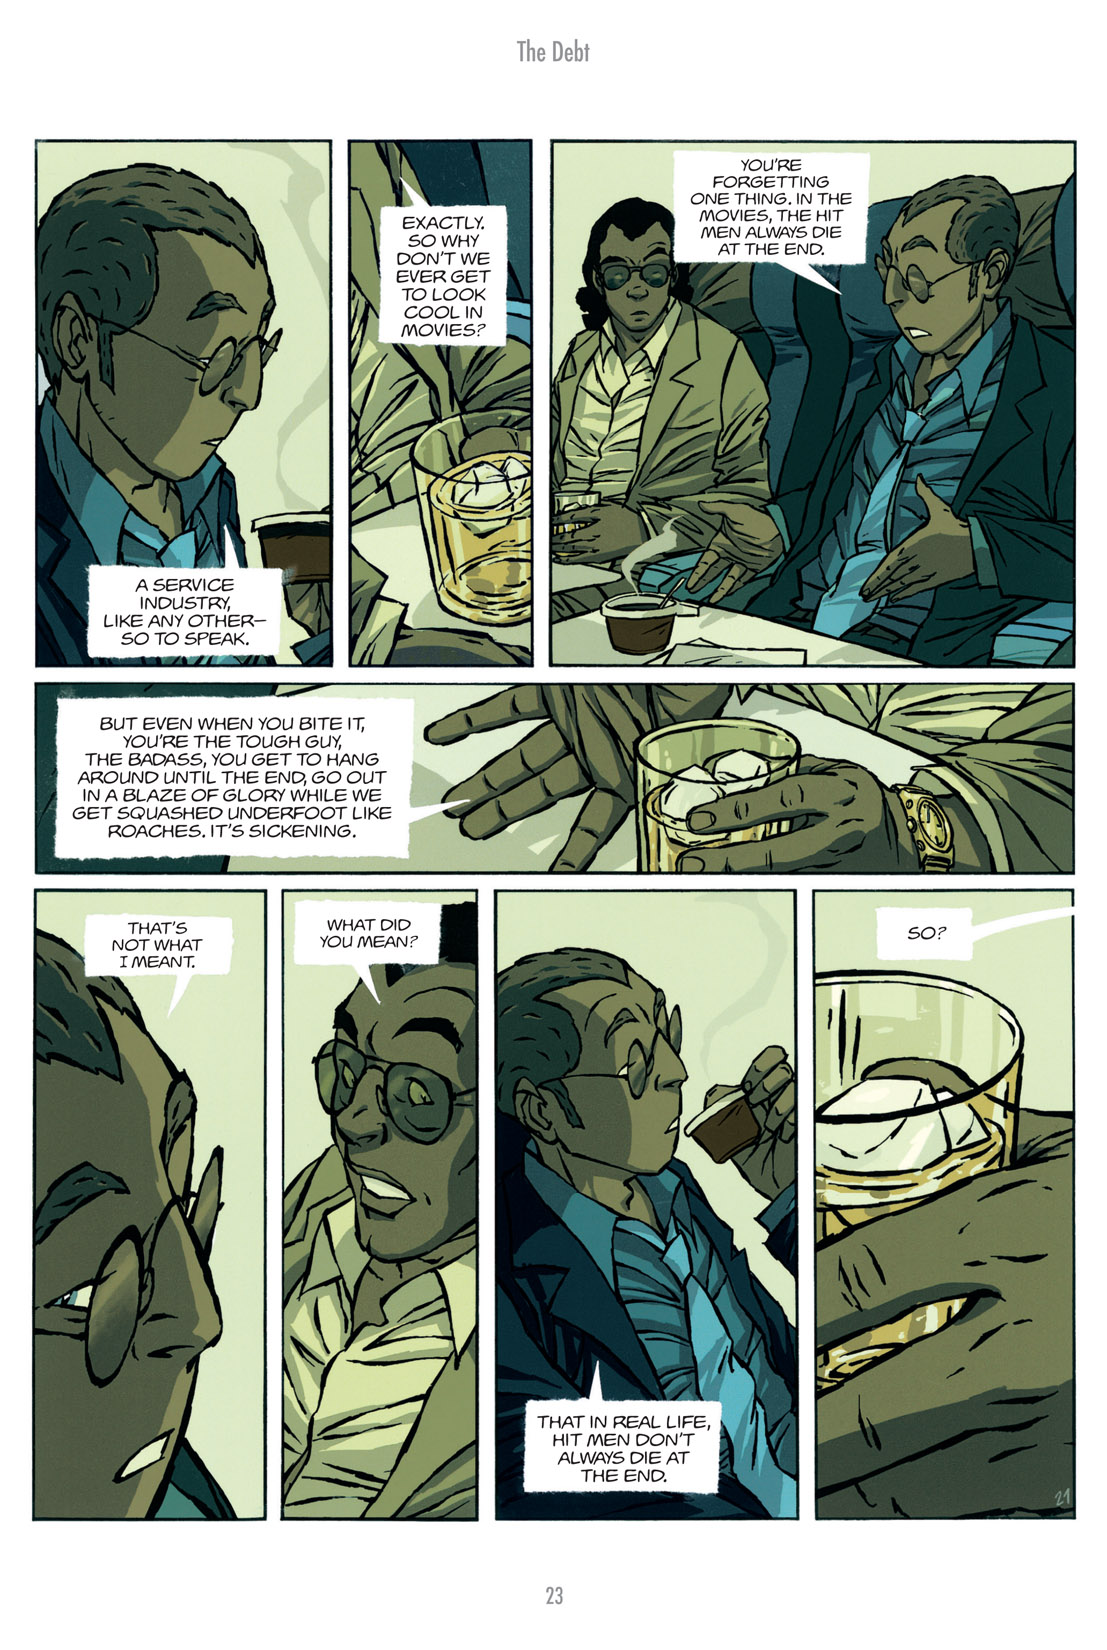 Read online The Killer comic -  Issue # TPB 2 - 30